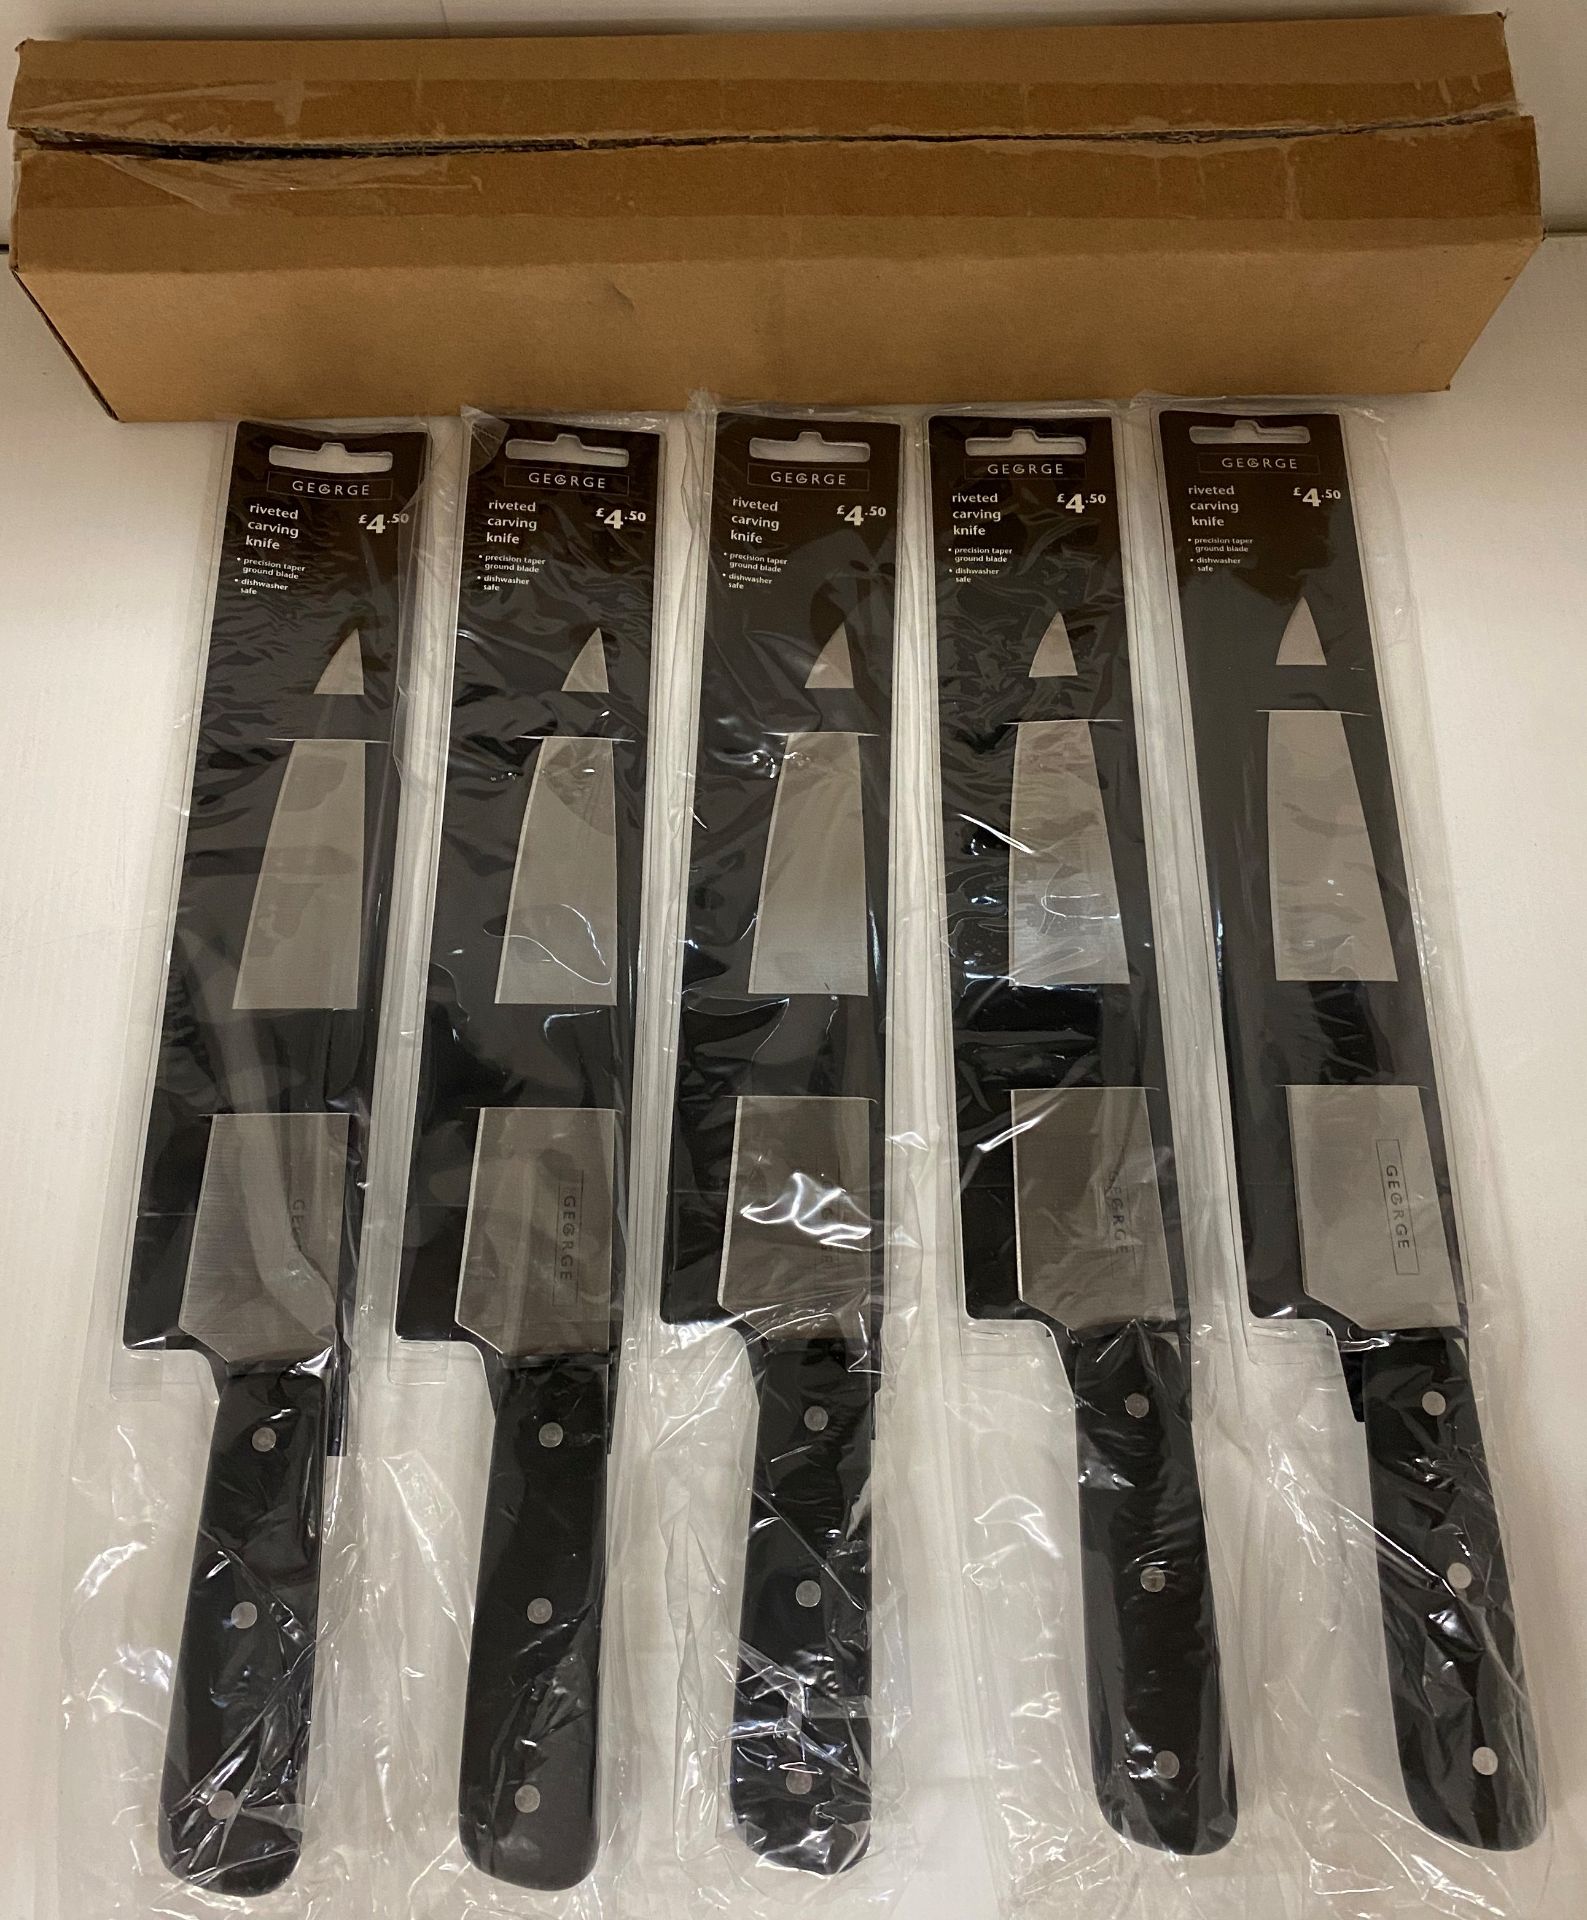 50 x Asda George Riveted Carving Knives